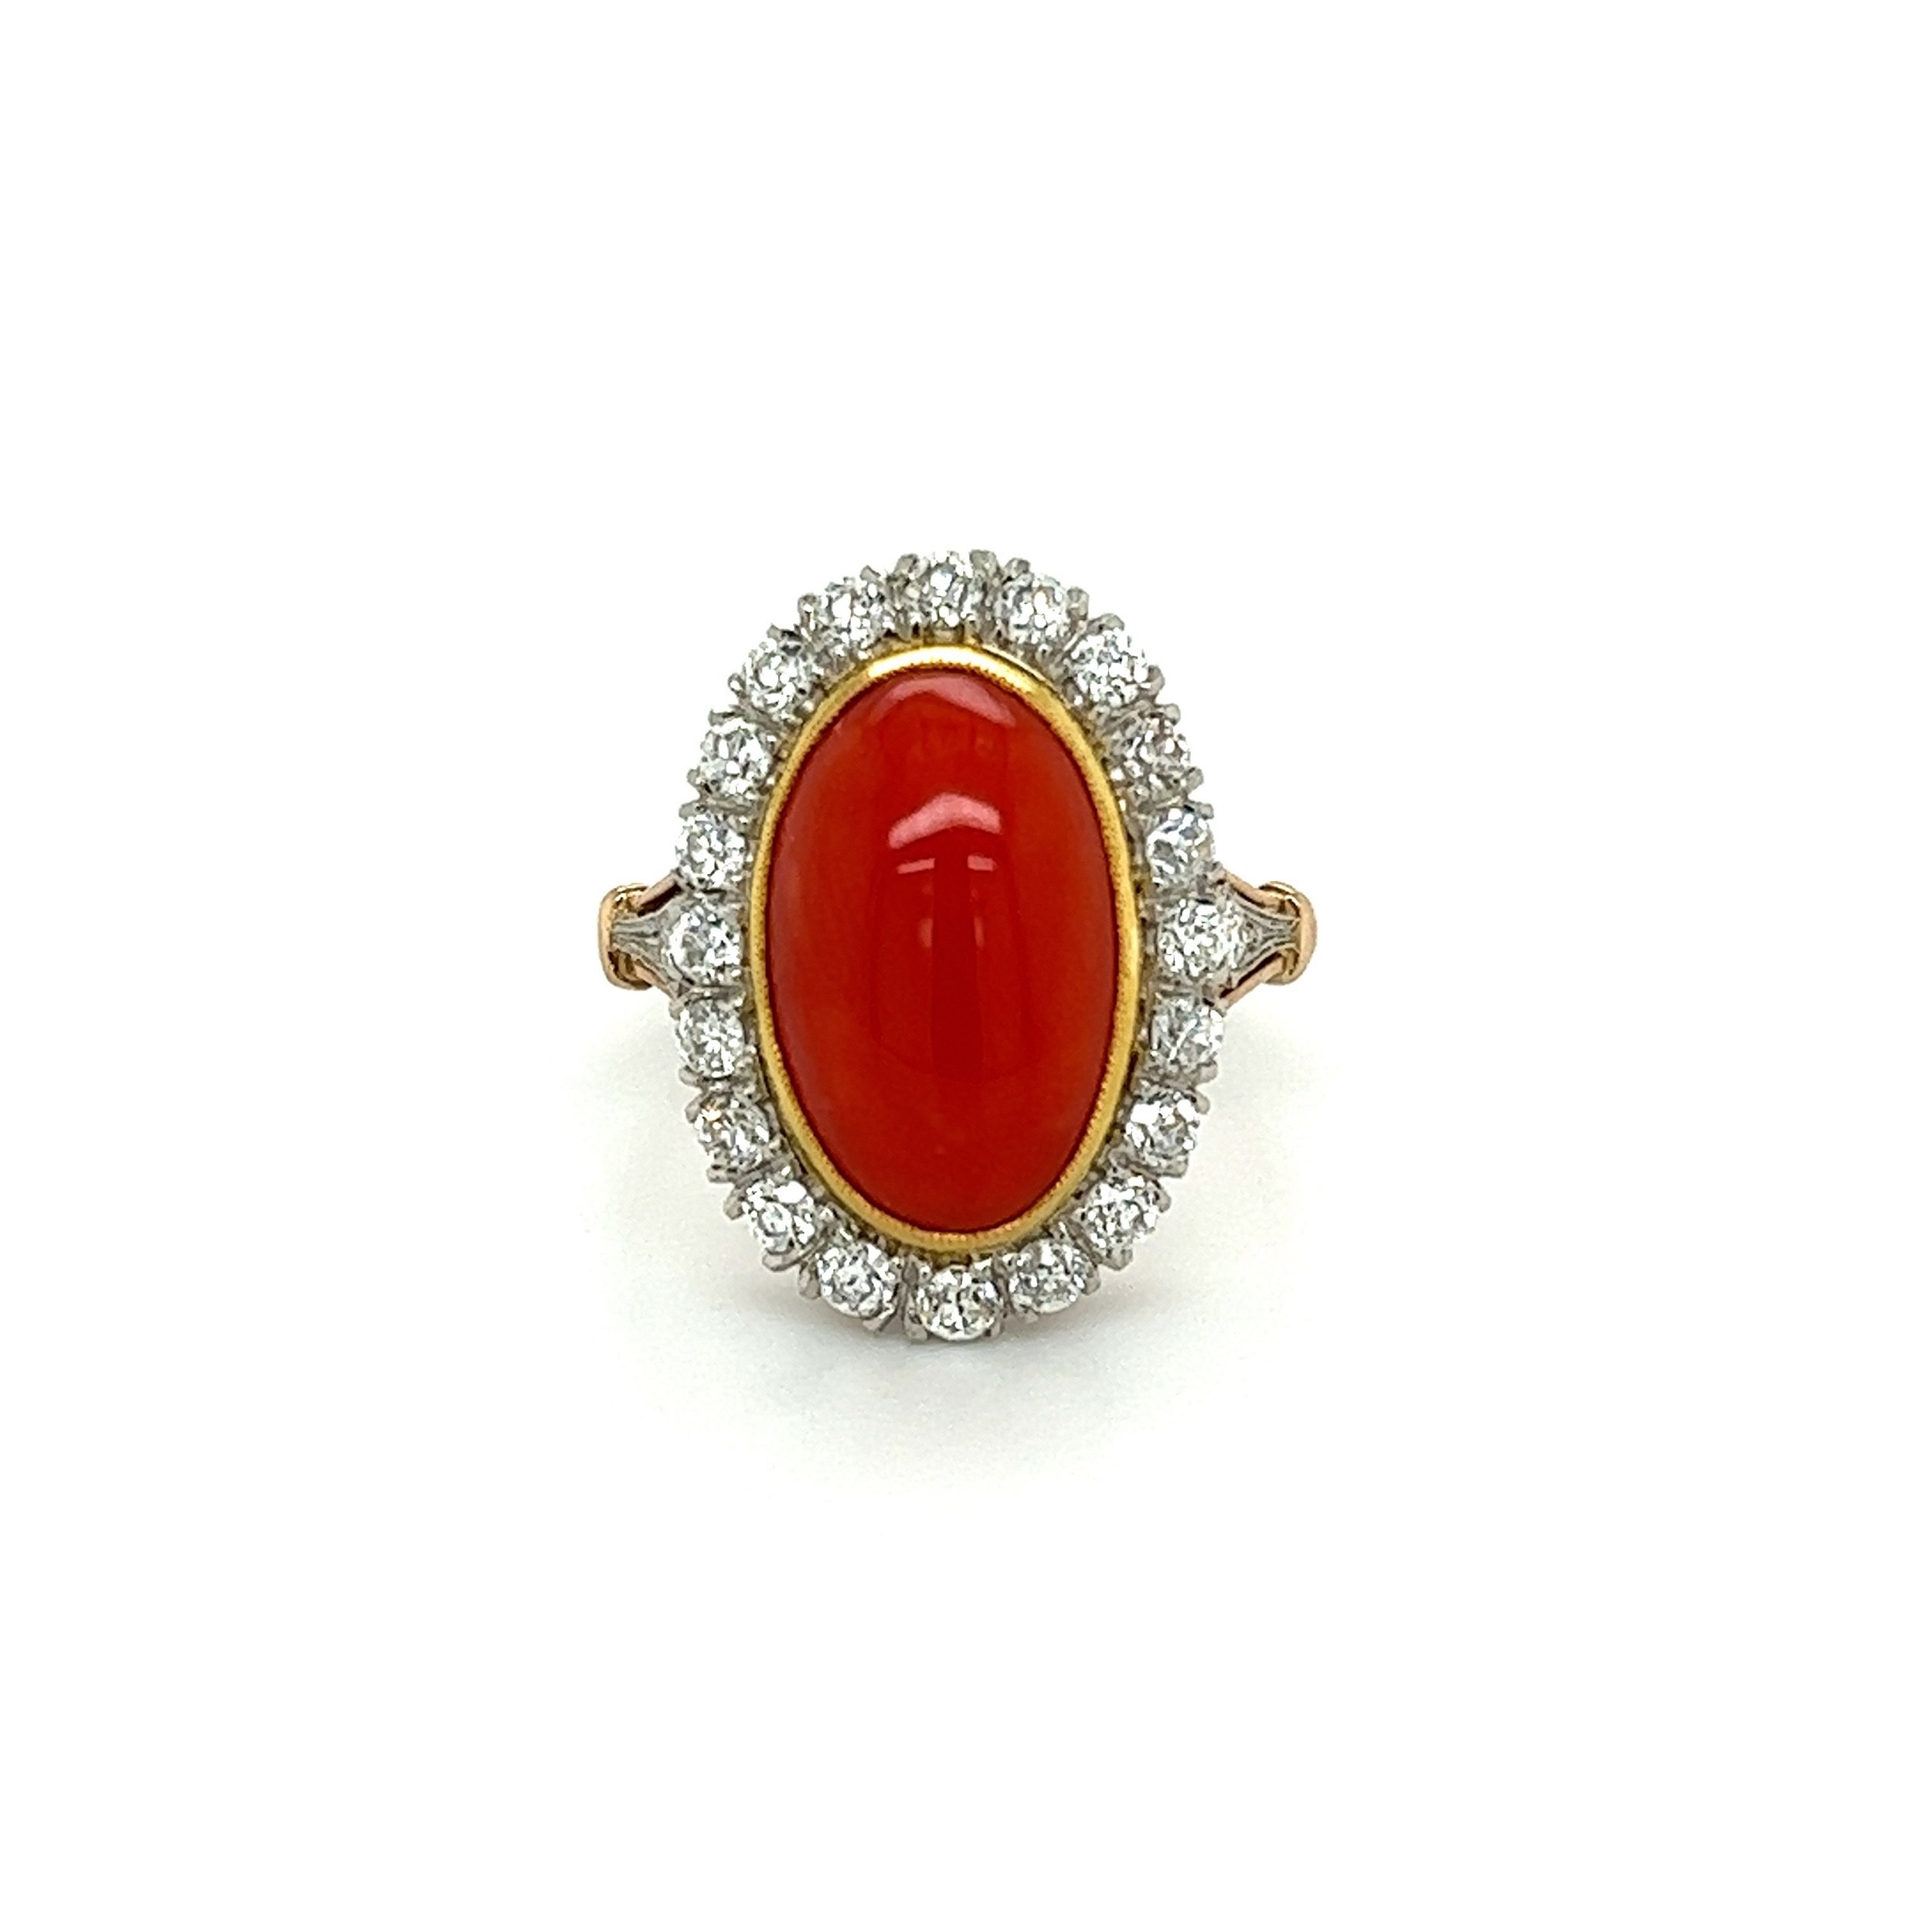 Platinum on 18K 3.66ct Oval Red Coral & .70tcw OEC Diamond Ring 5.5g, s6.5